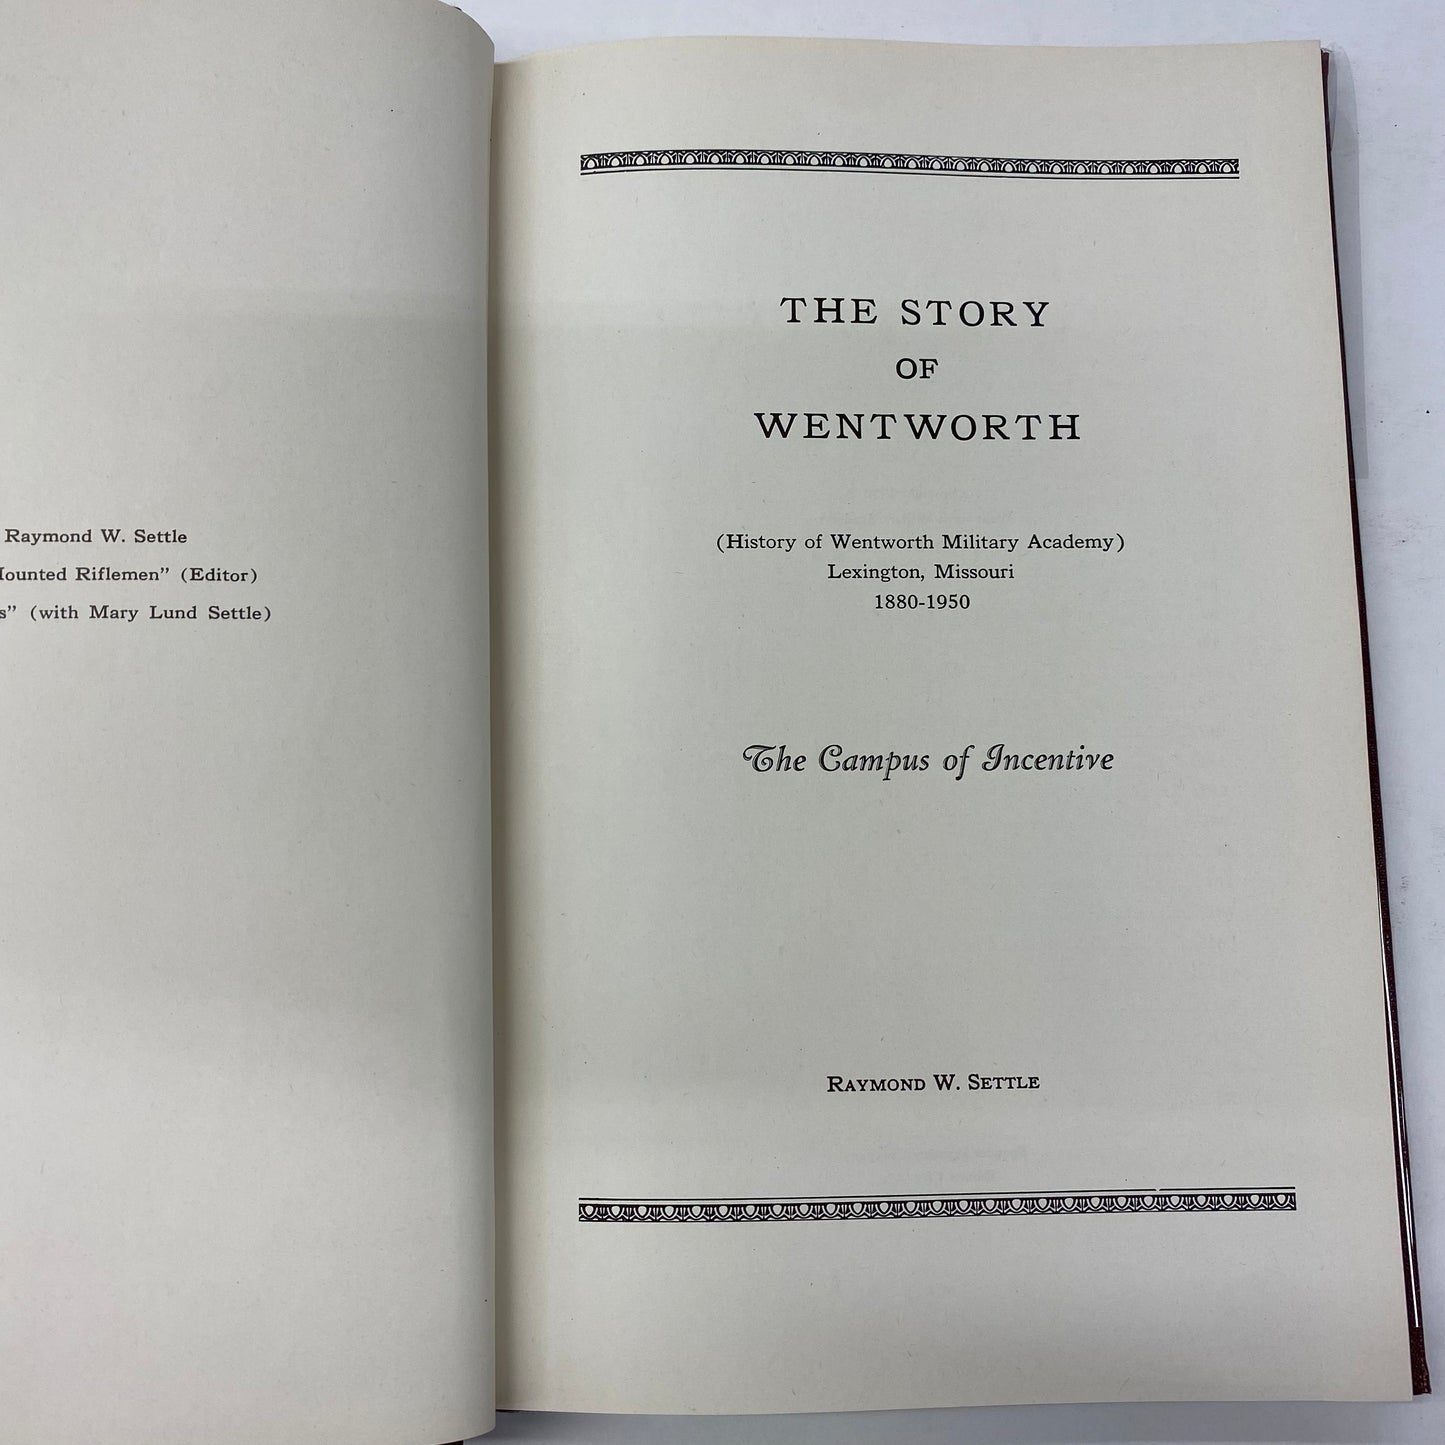 The Story of Wentworth - Raymond W. Settle - Glass Decal, Foldout In Front - 1st Edition - 1950